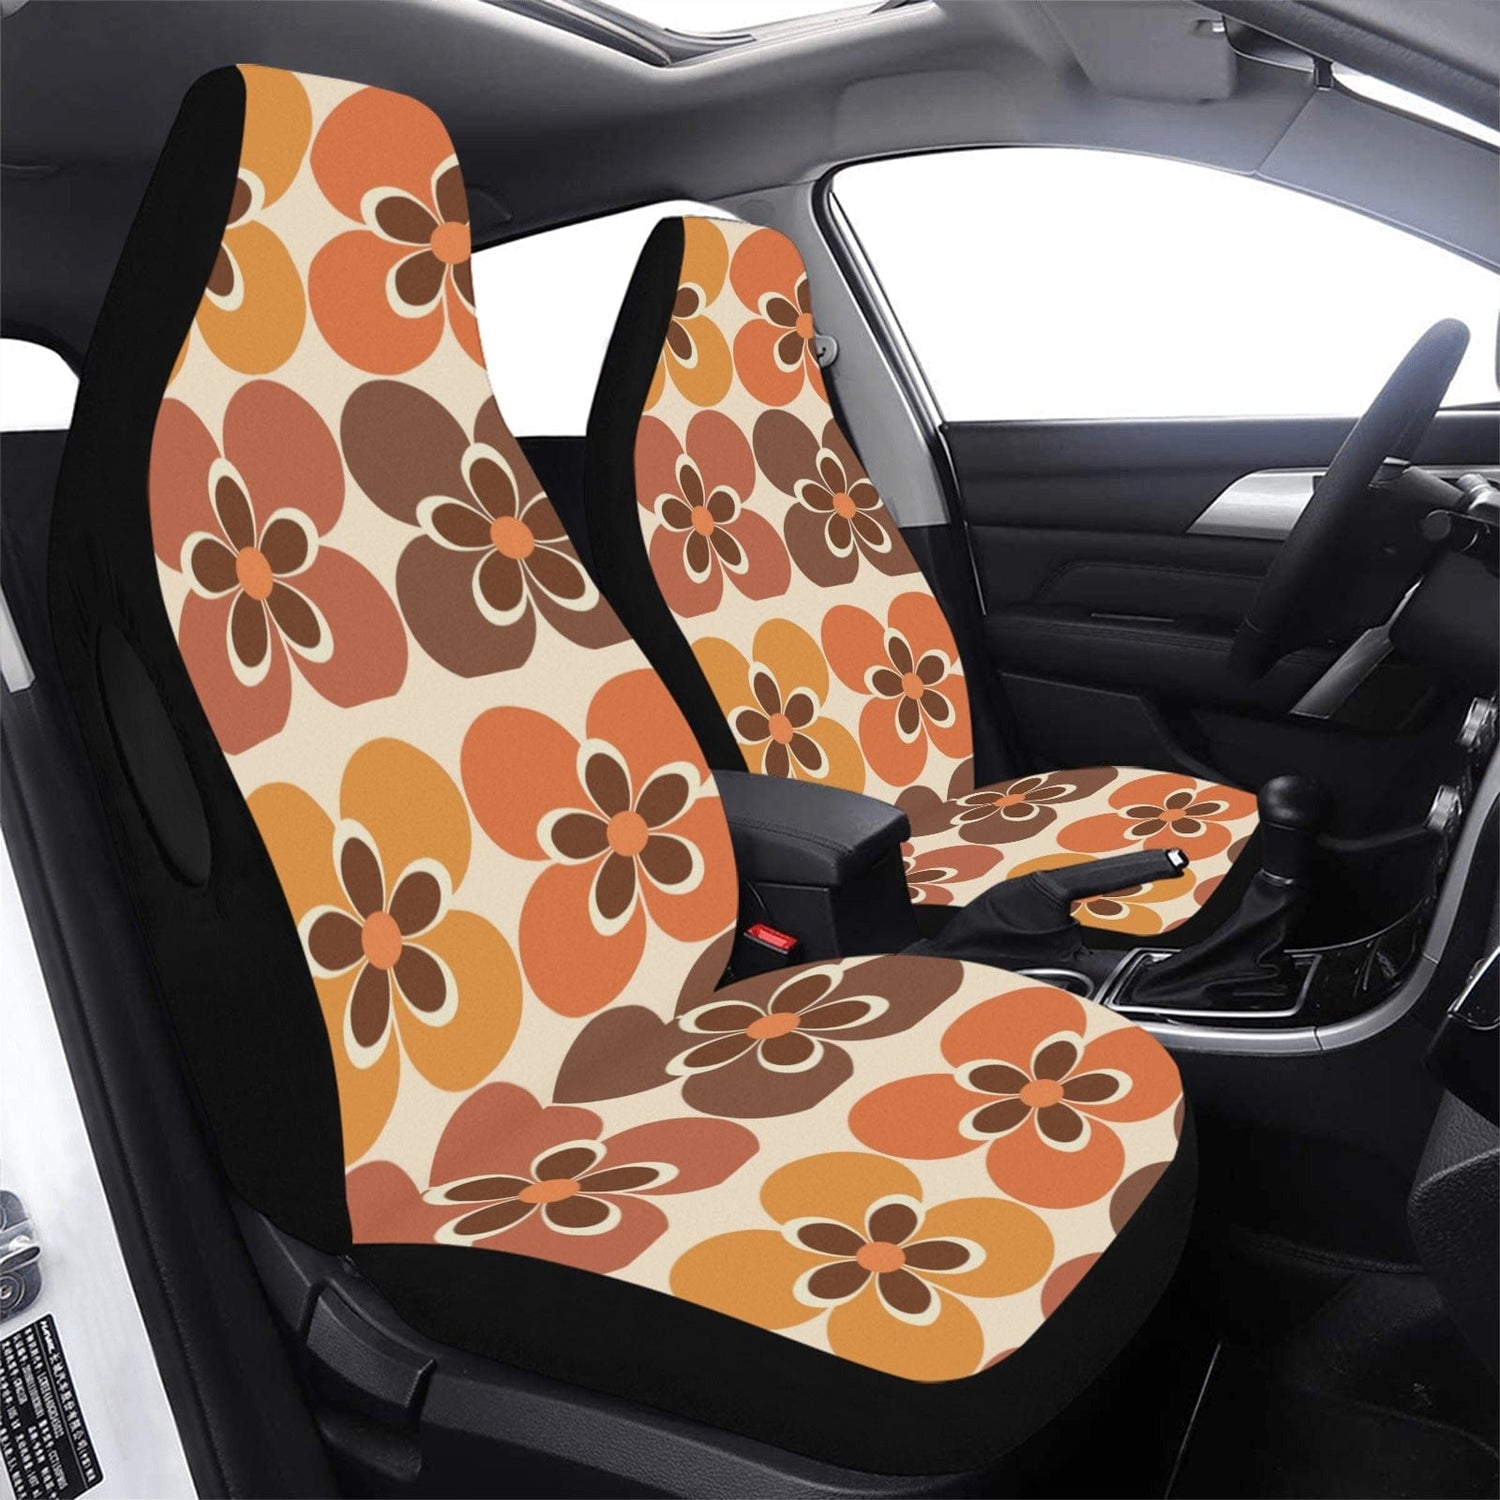 Retro Mid Mod Car Seat Covers, Orange, Flower Power, Mod Daisy, Hipster,  Groovy Car Accessories 